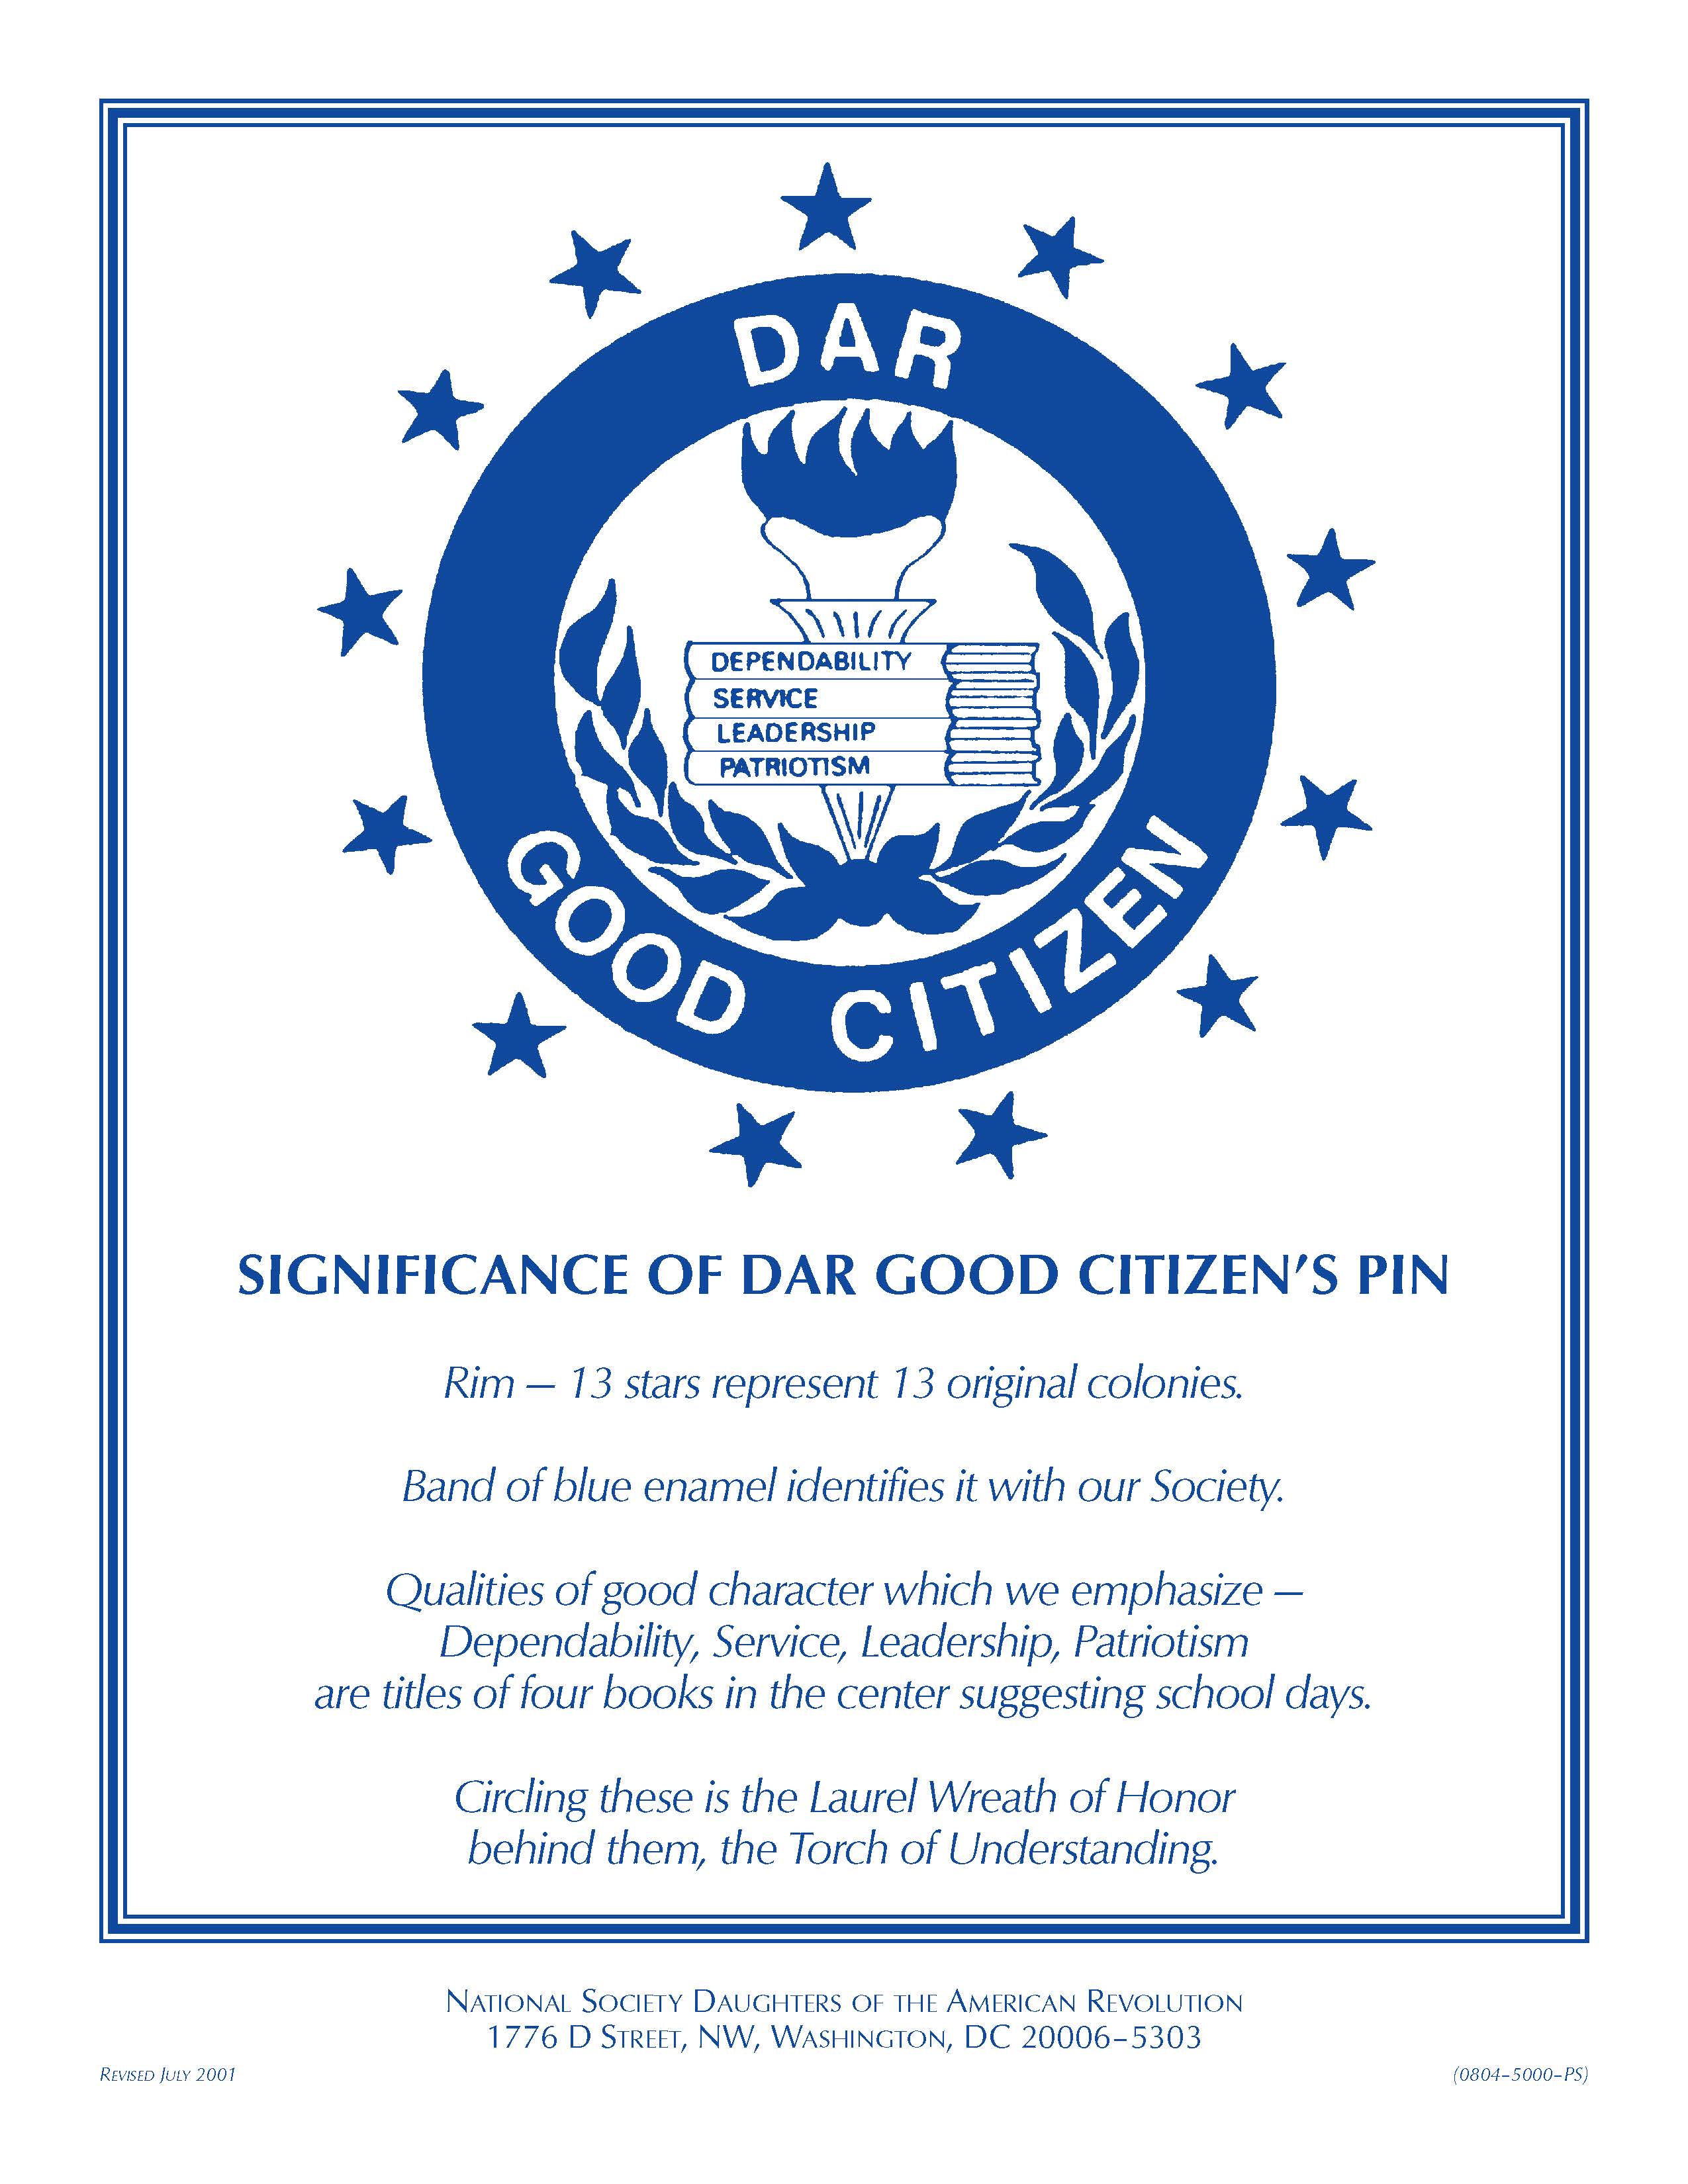 Learn More About the DAR Good Citizens Committee | Today's DAR